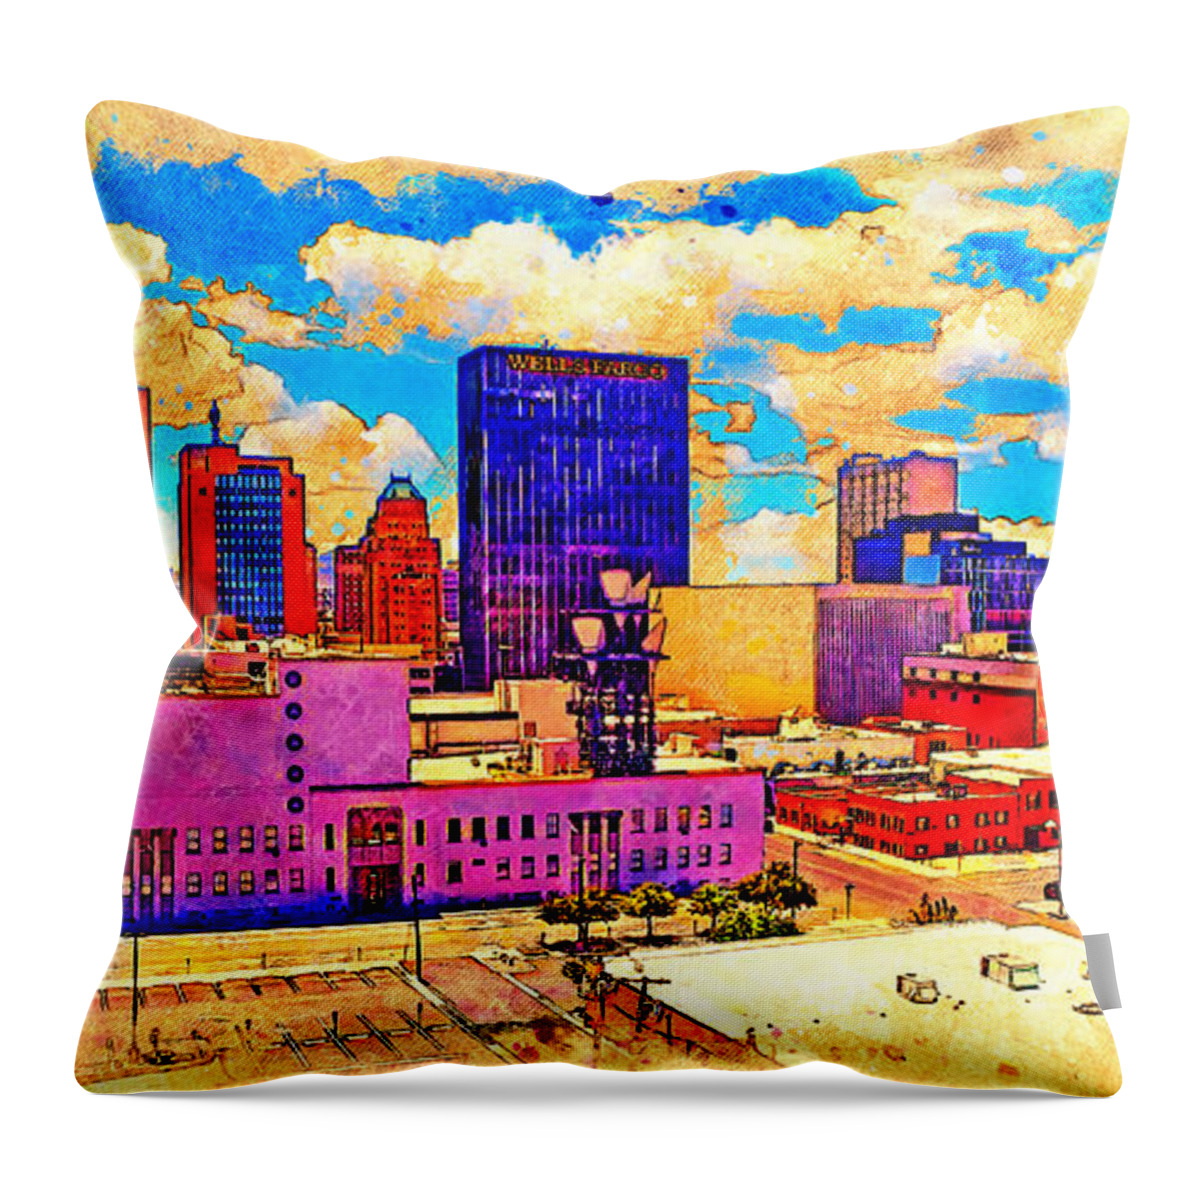 El Paso Throw Pillow featuring the digital art Skyline of Downtown El Paso, Texas, digital painting with vintage look by Nicko Prints